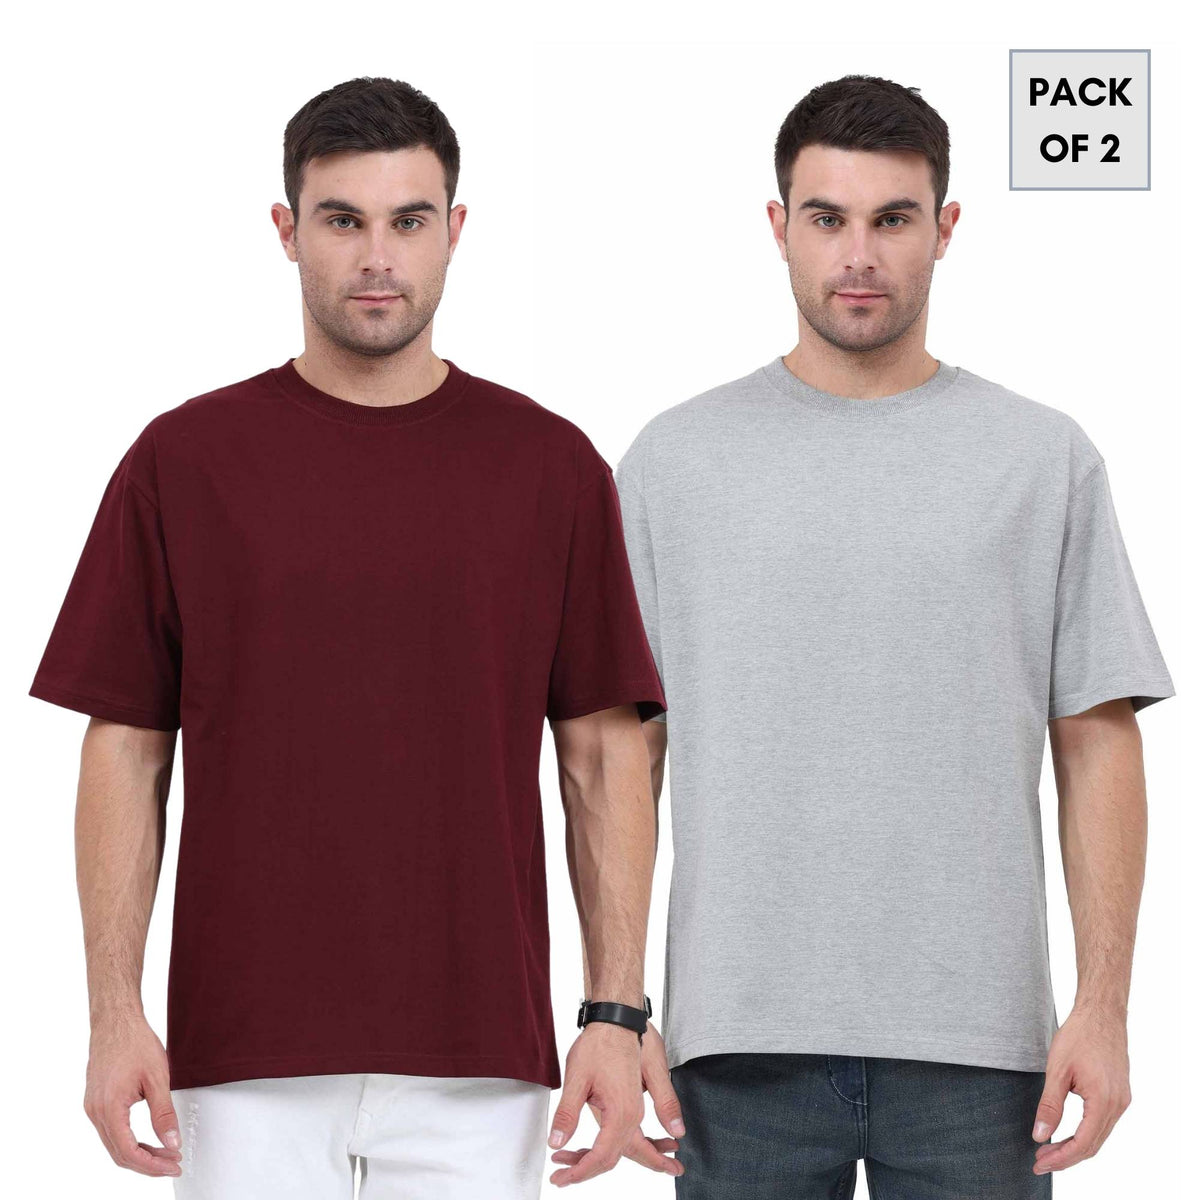 oversized-tshirt-pack-of-2-combo-for-men-and-women-gogirgit-cotton-tees